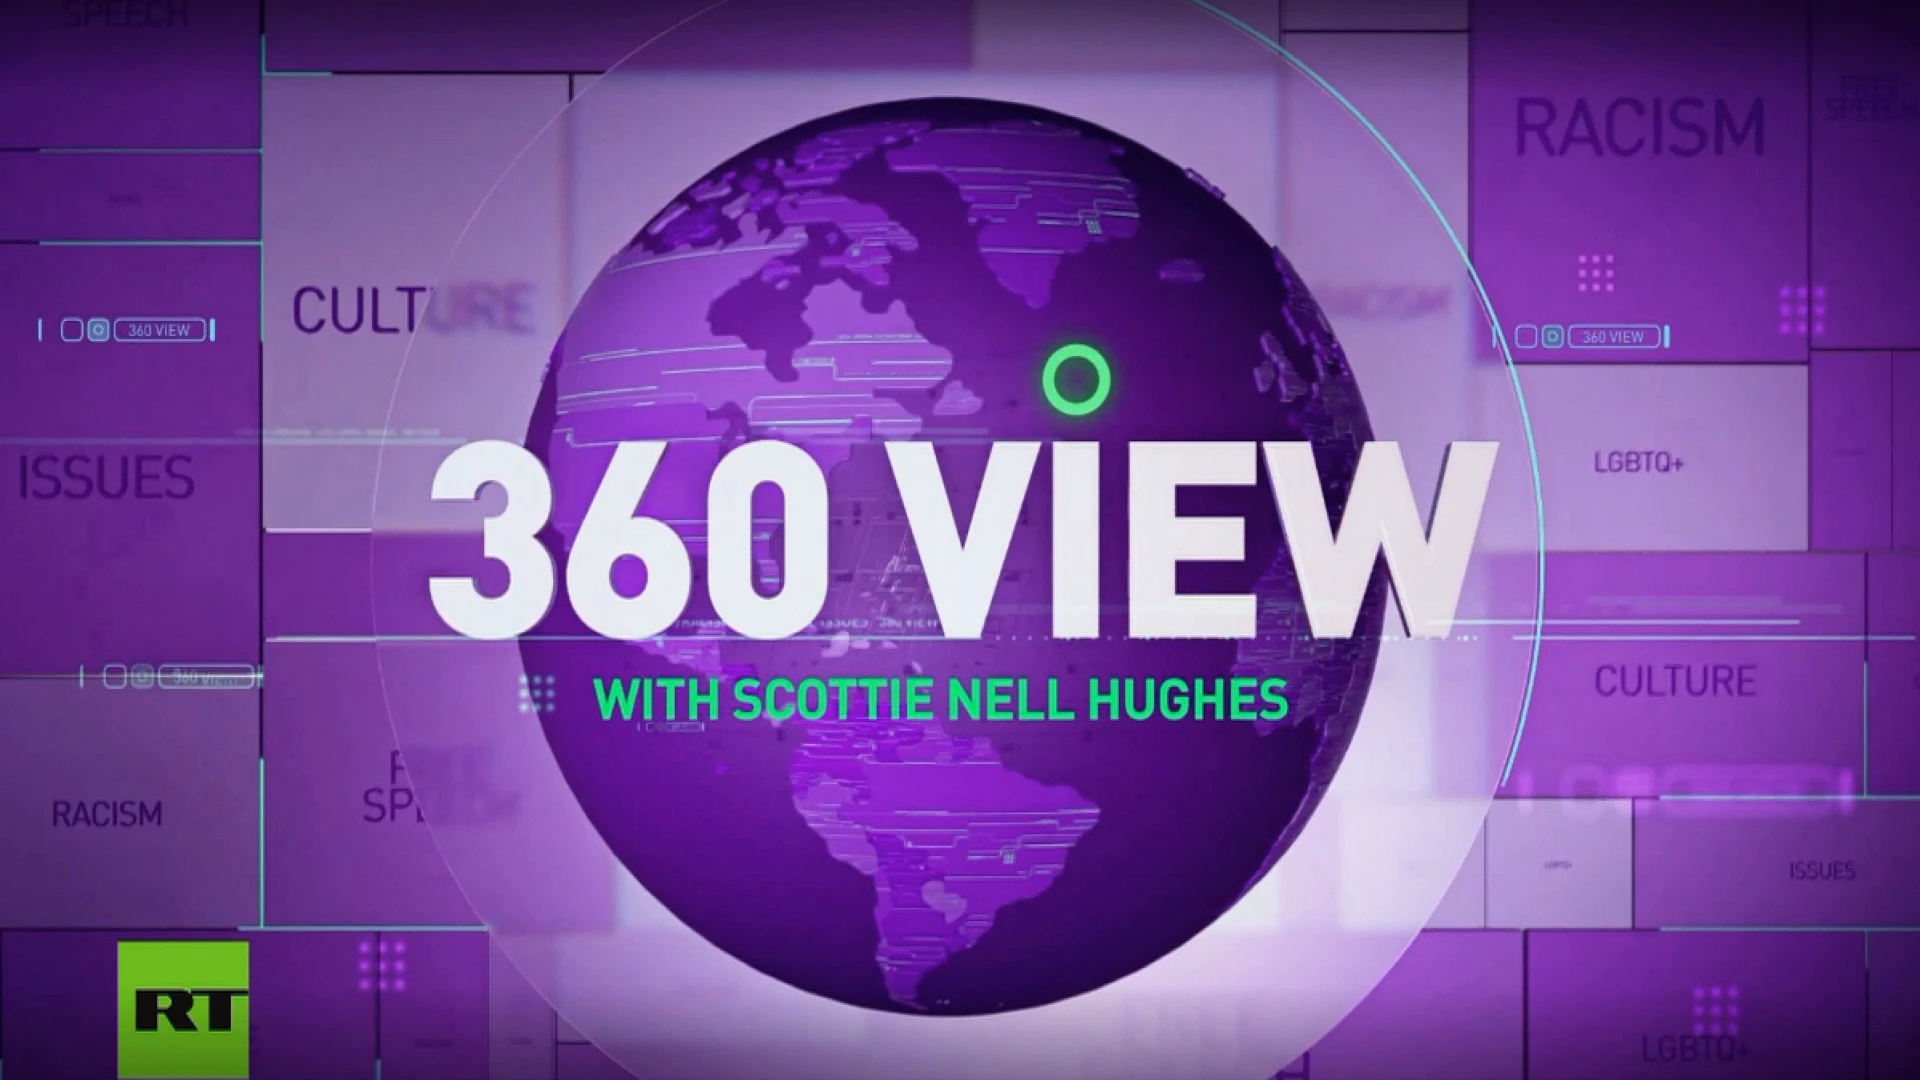 The 360 View | Climate change blame game